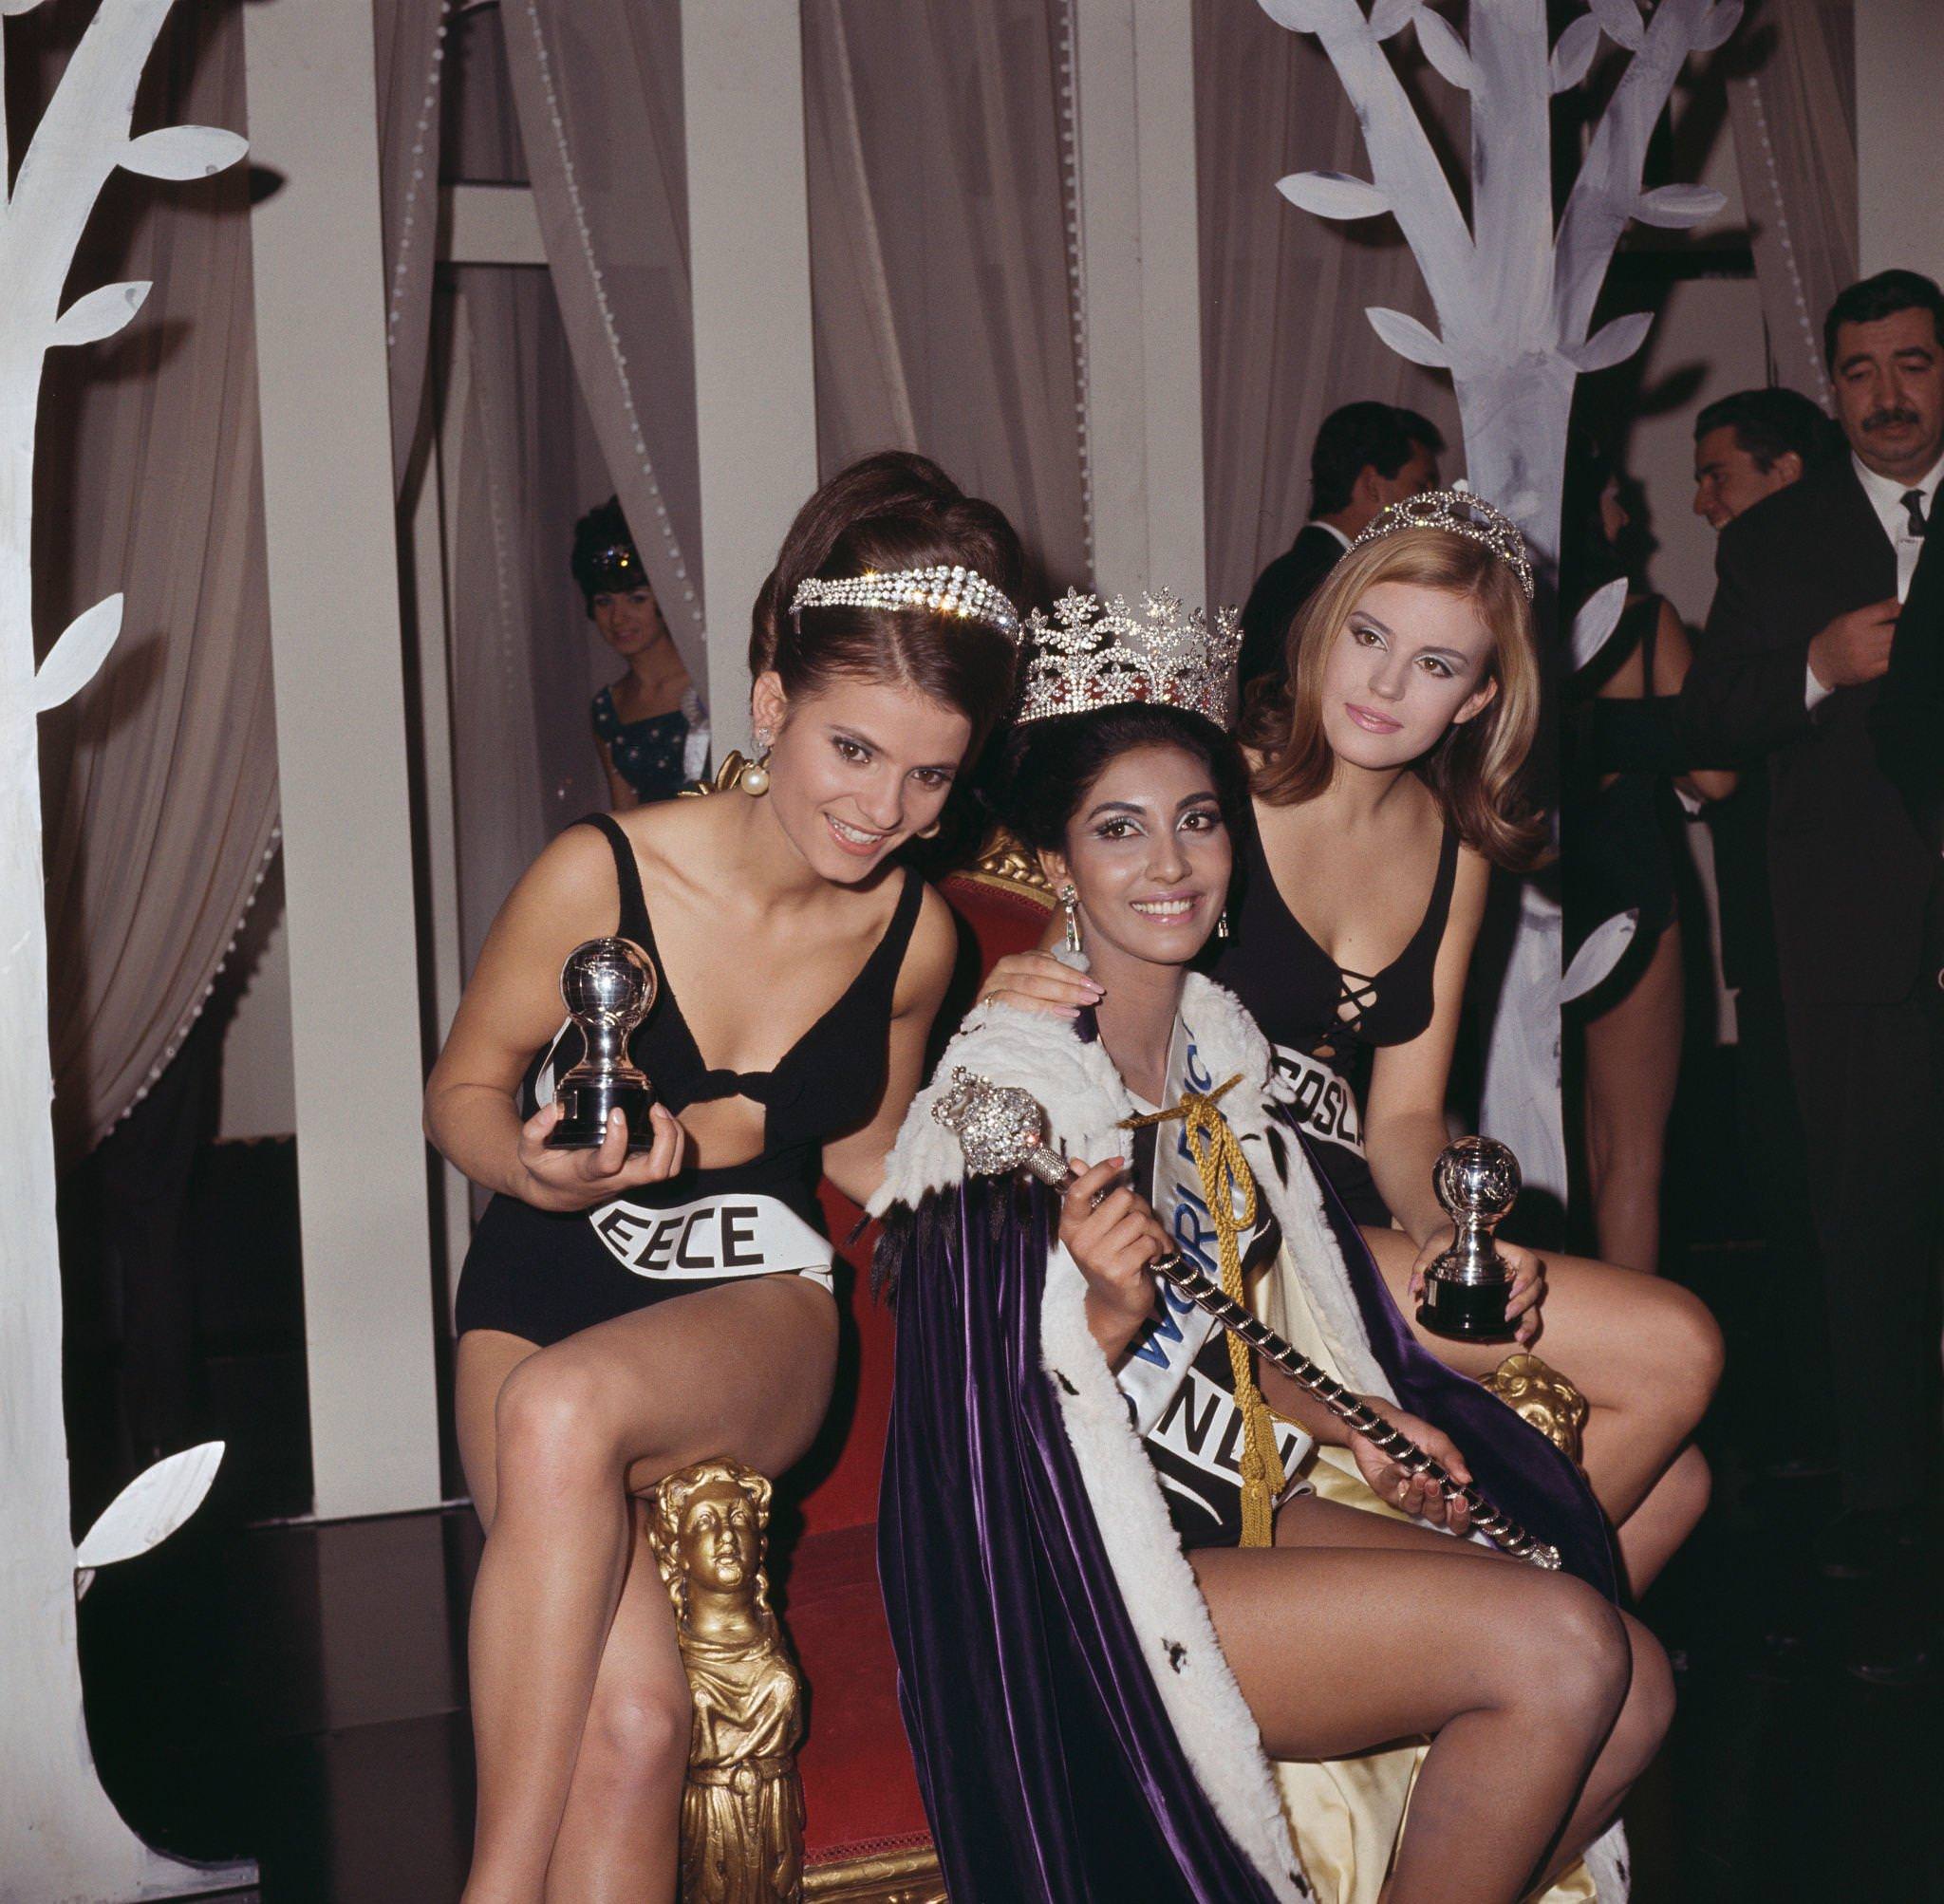 Winner of Miss World 1966, Reita Faria of India wears her crown and sits on the winner's throne with runners-up.